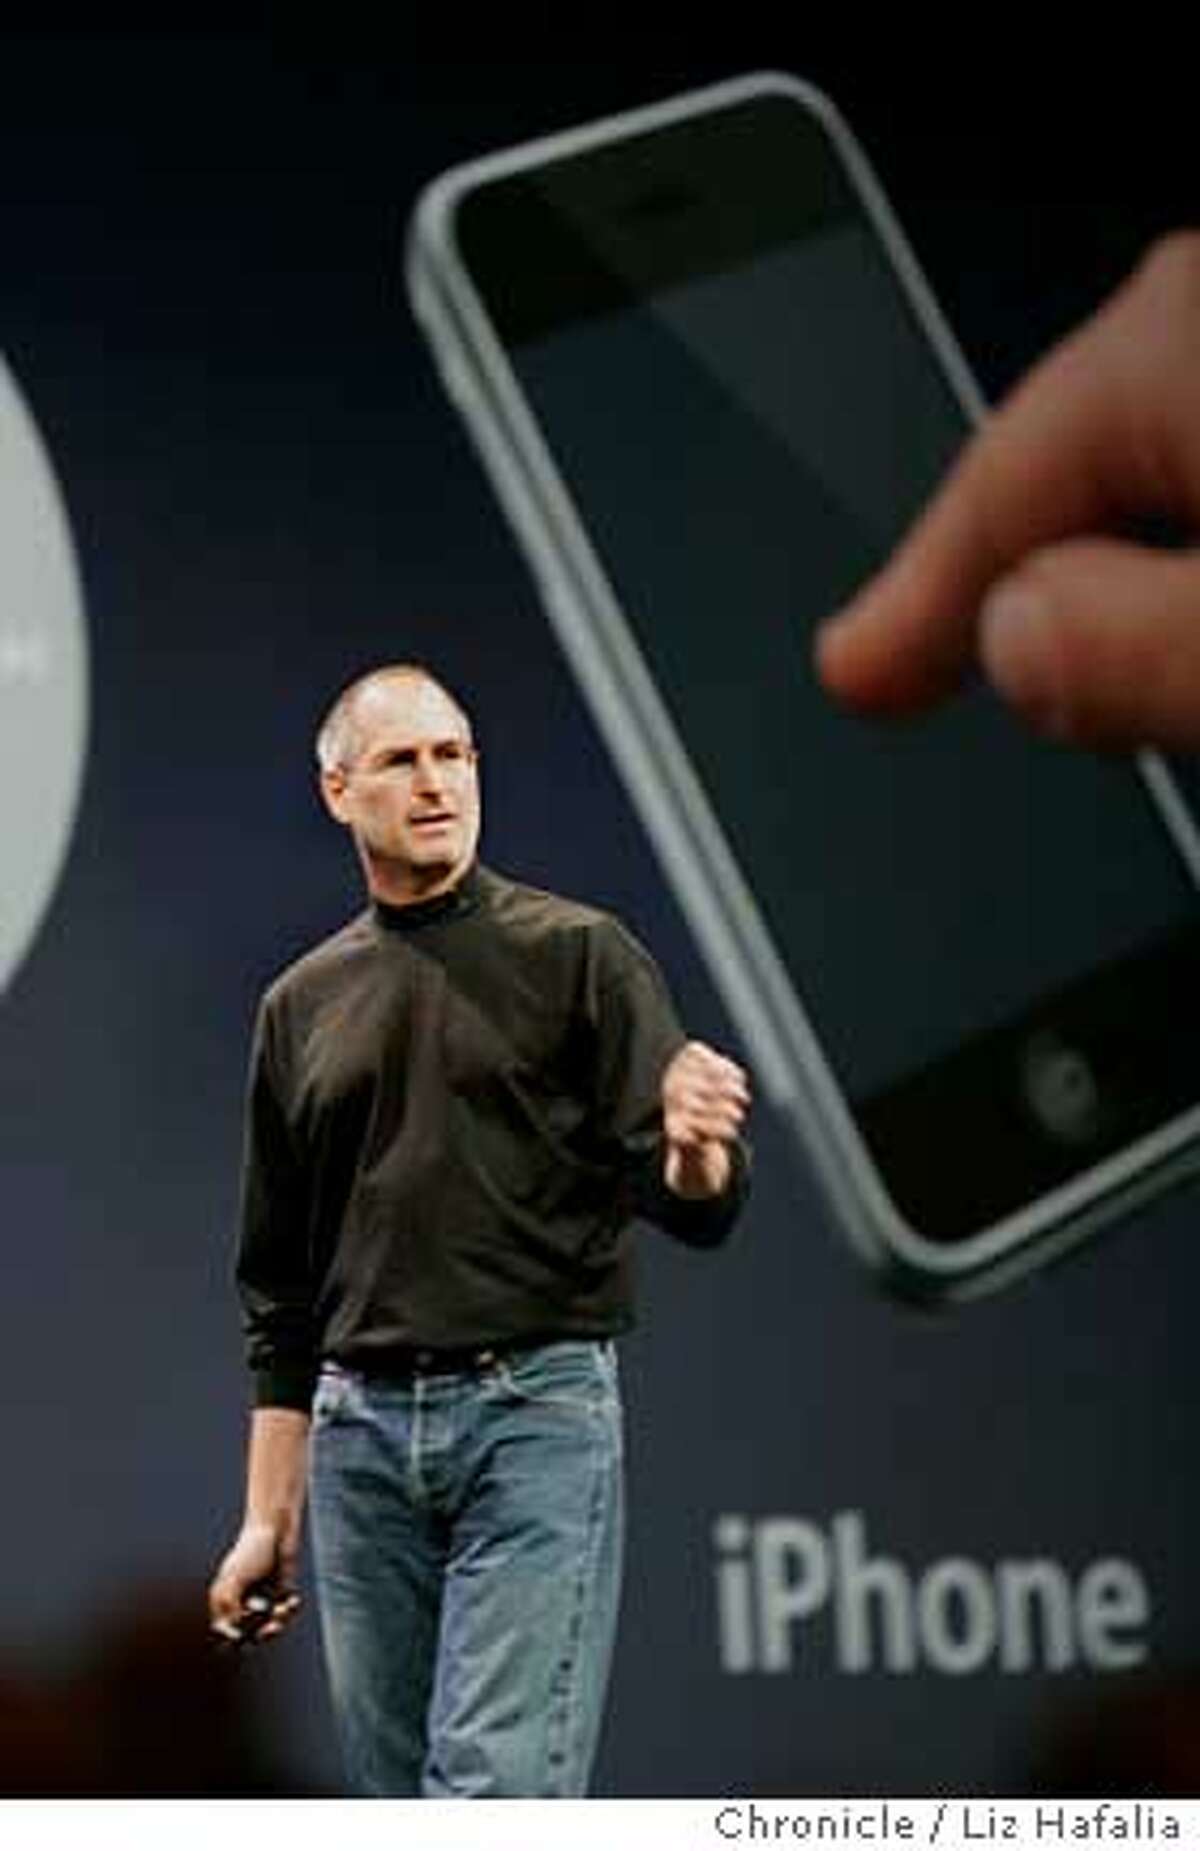 Steve Jobs introduces IPhone at the Apple MacWorld keynote address in Moscone West. Photographed by Liz Hafalia